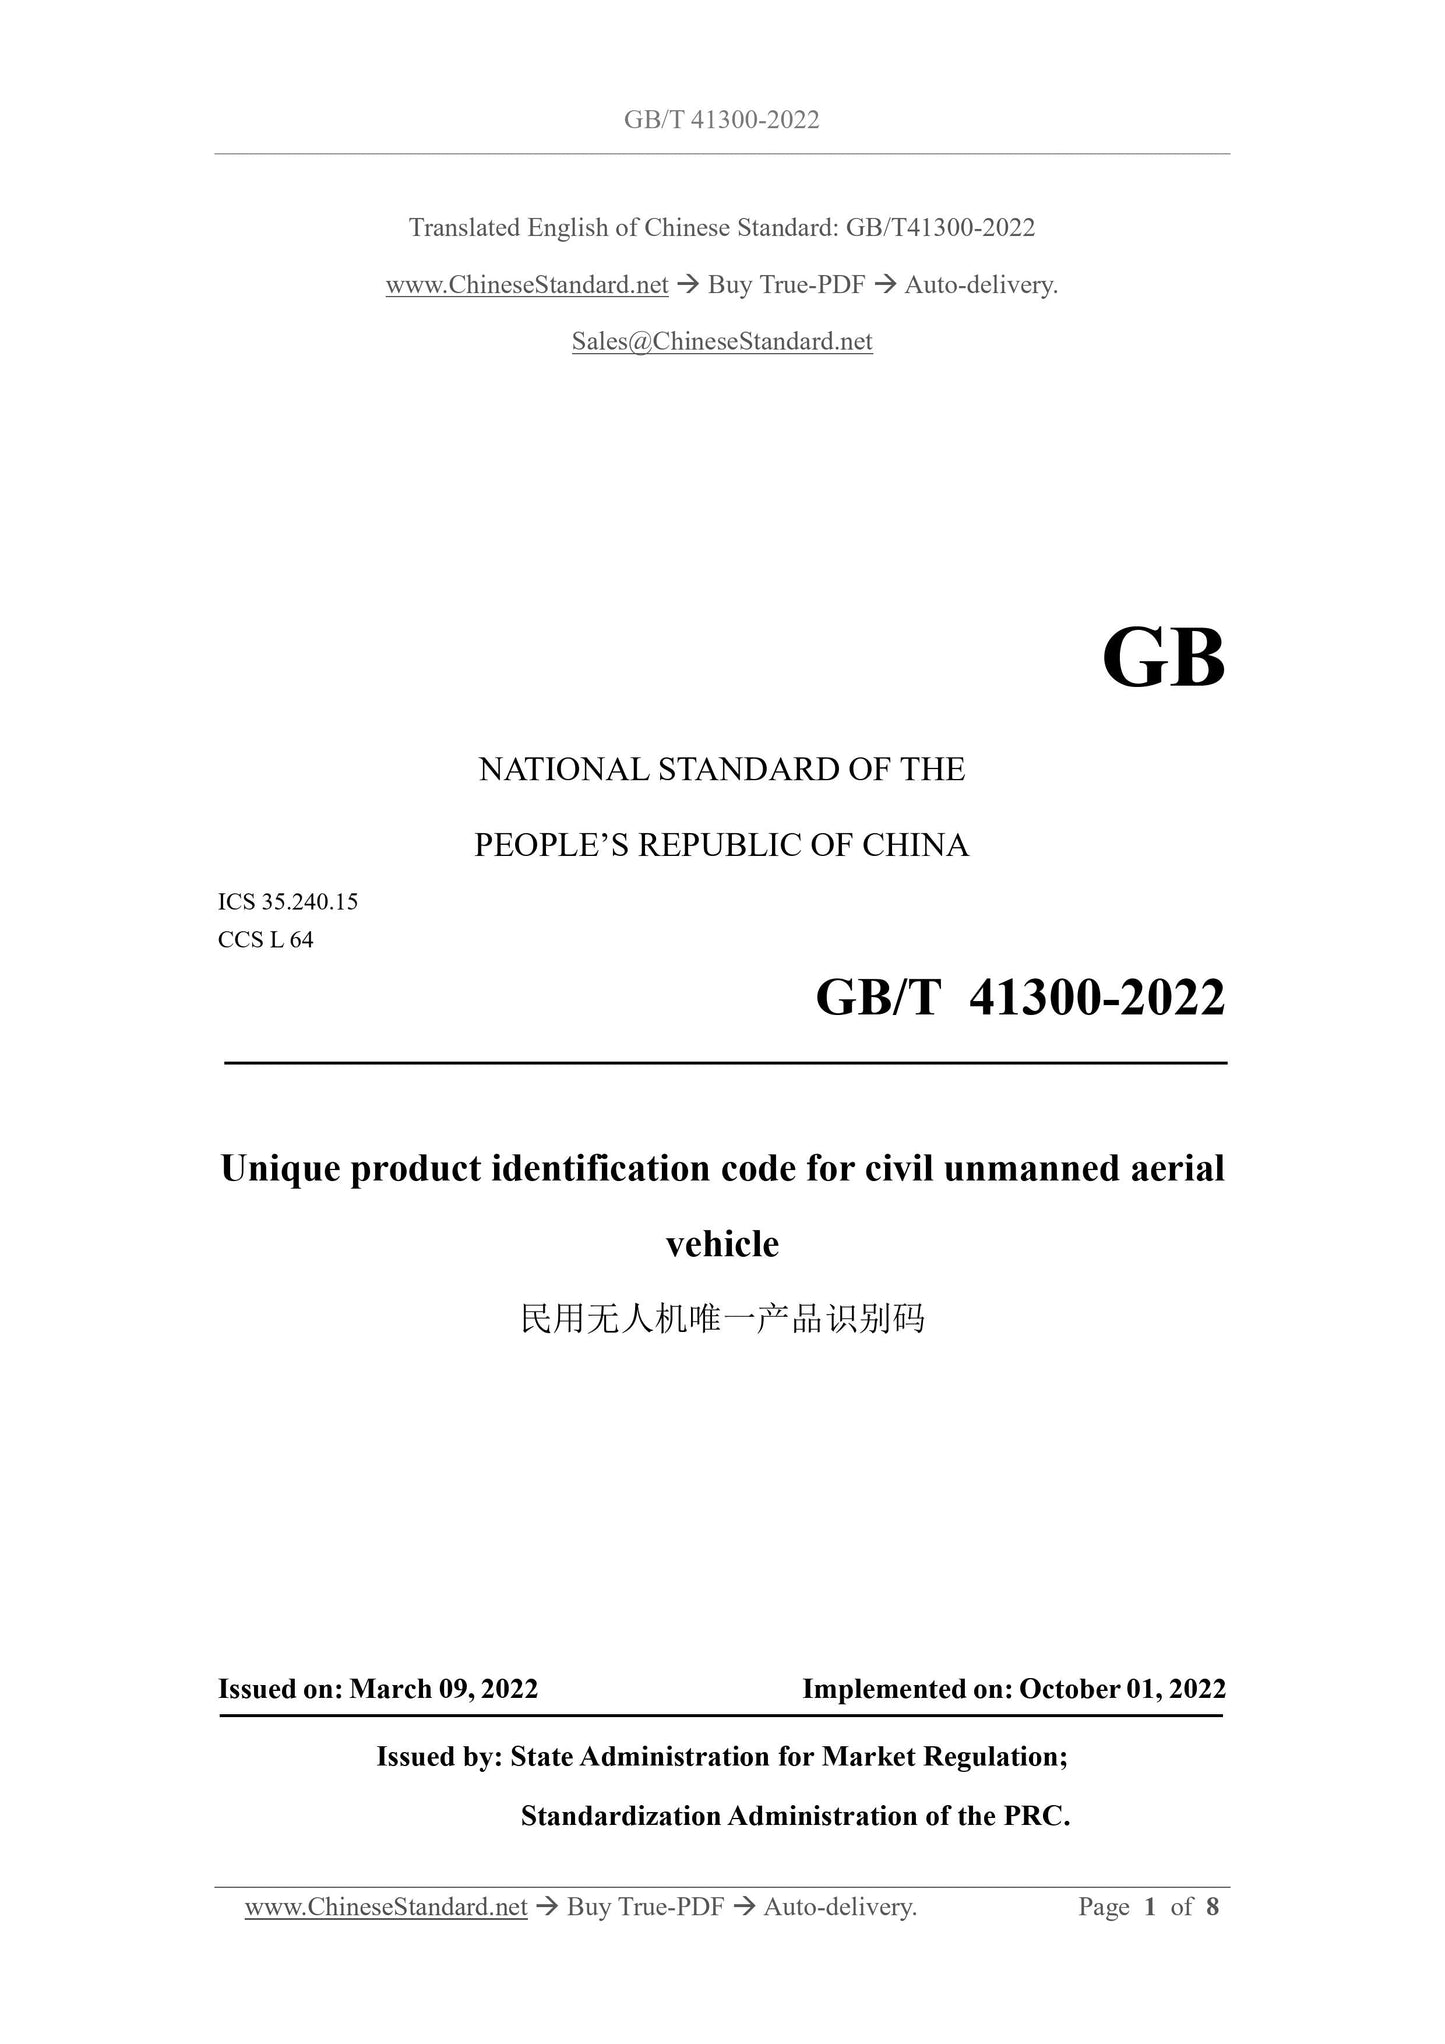 GB/T 41300-2022 Page 1